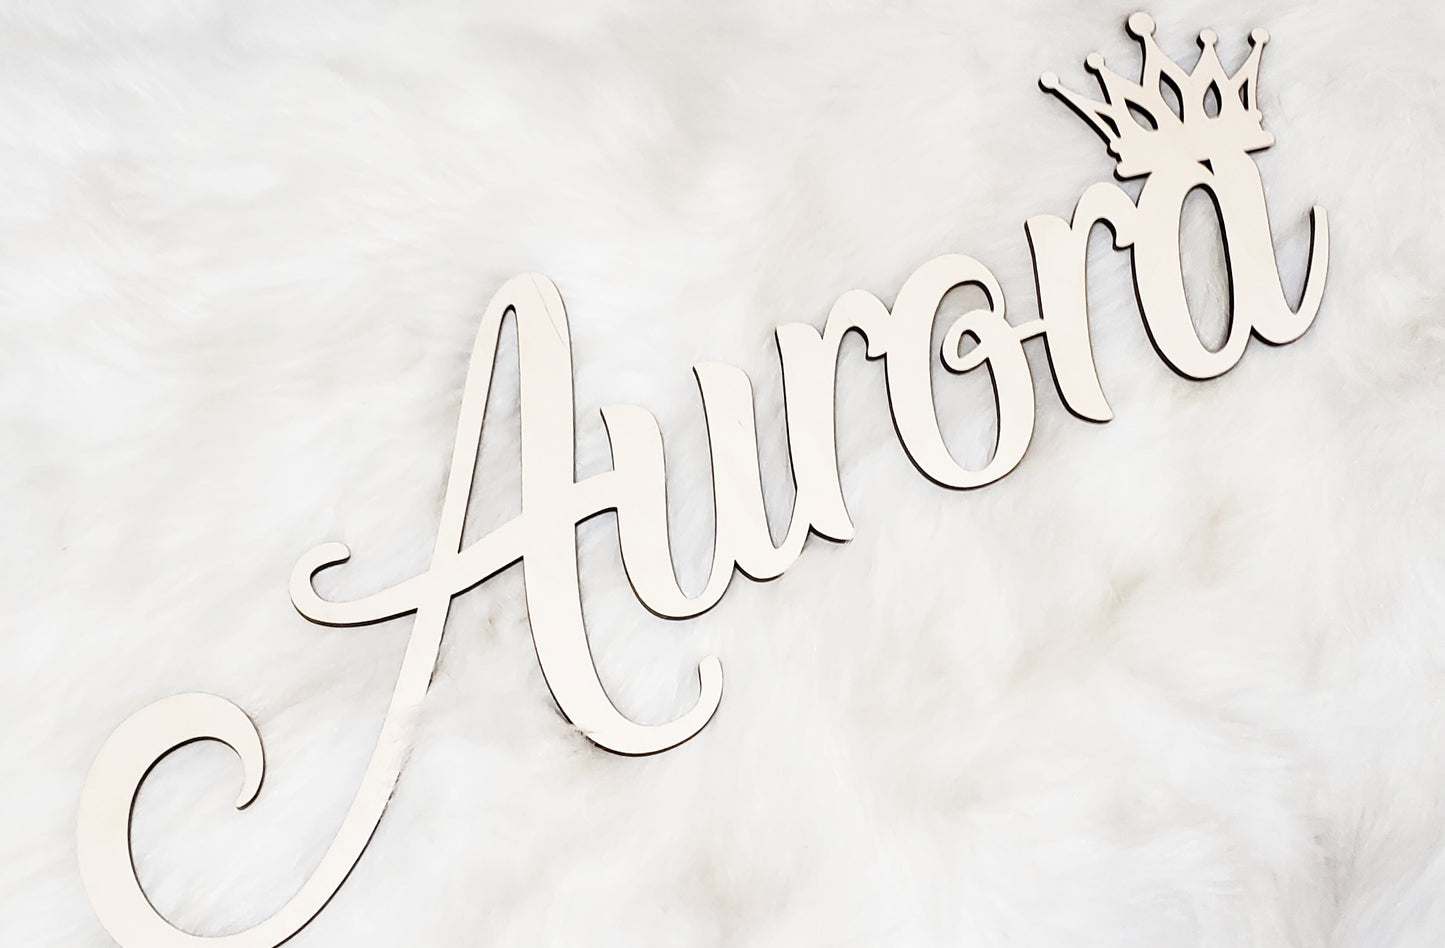 Nursery Name with crown